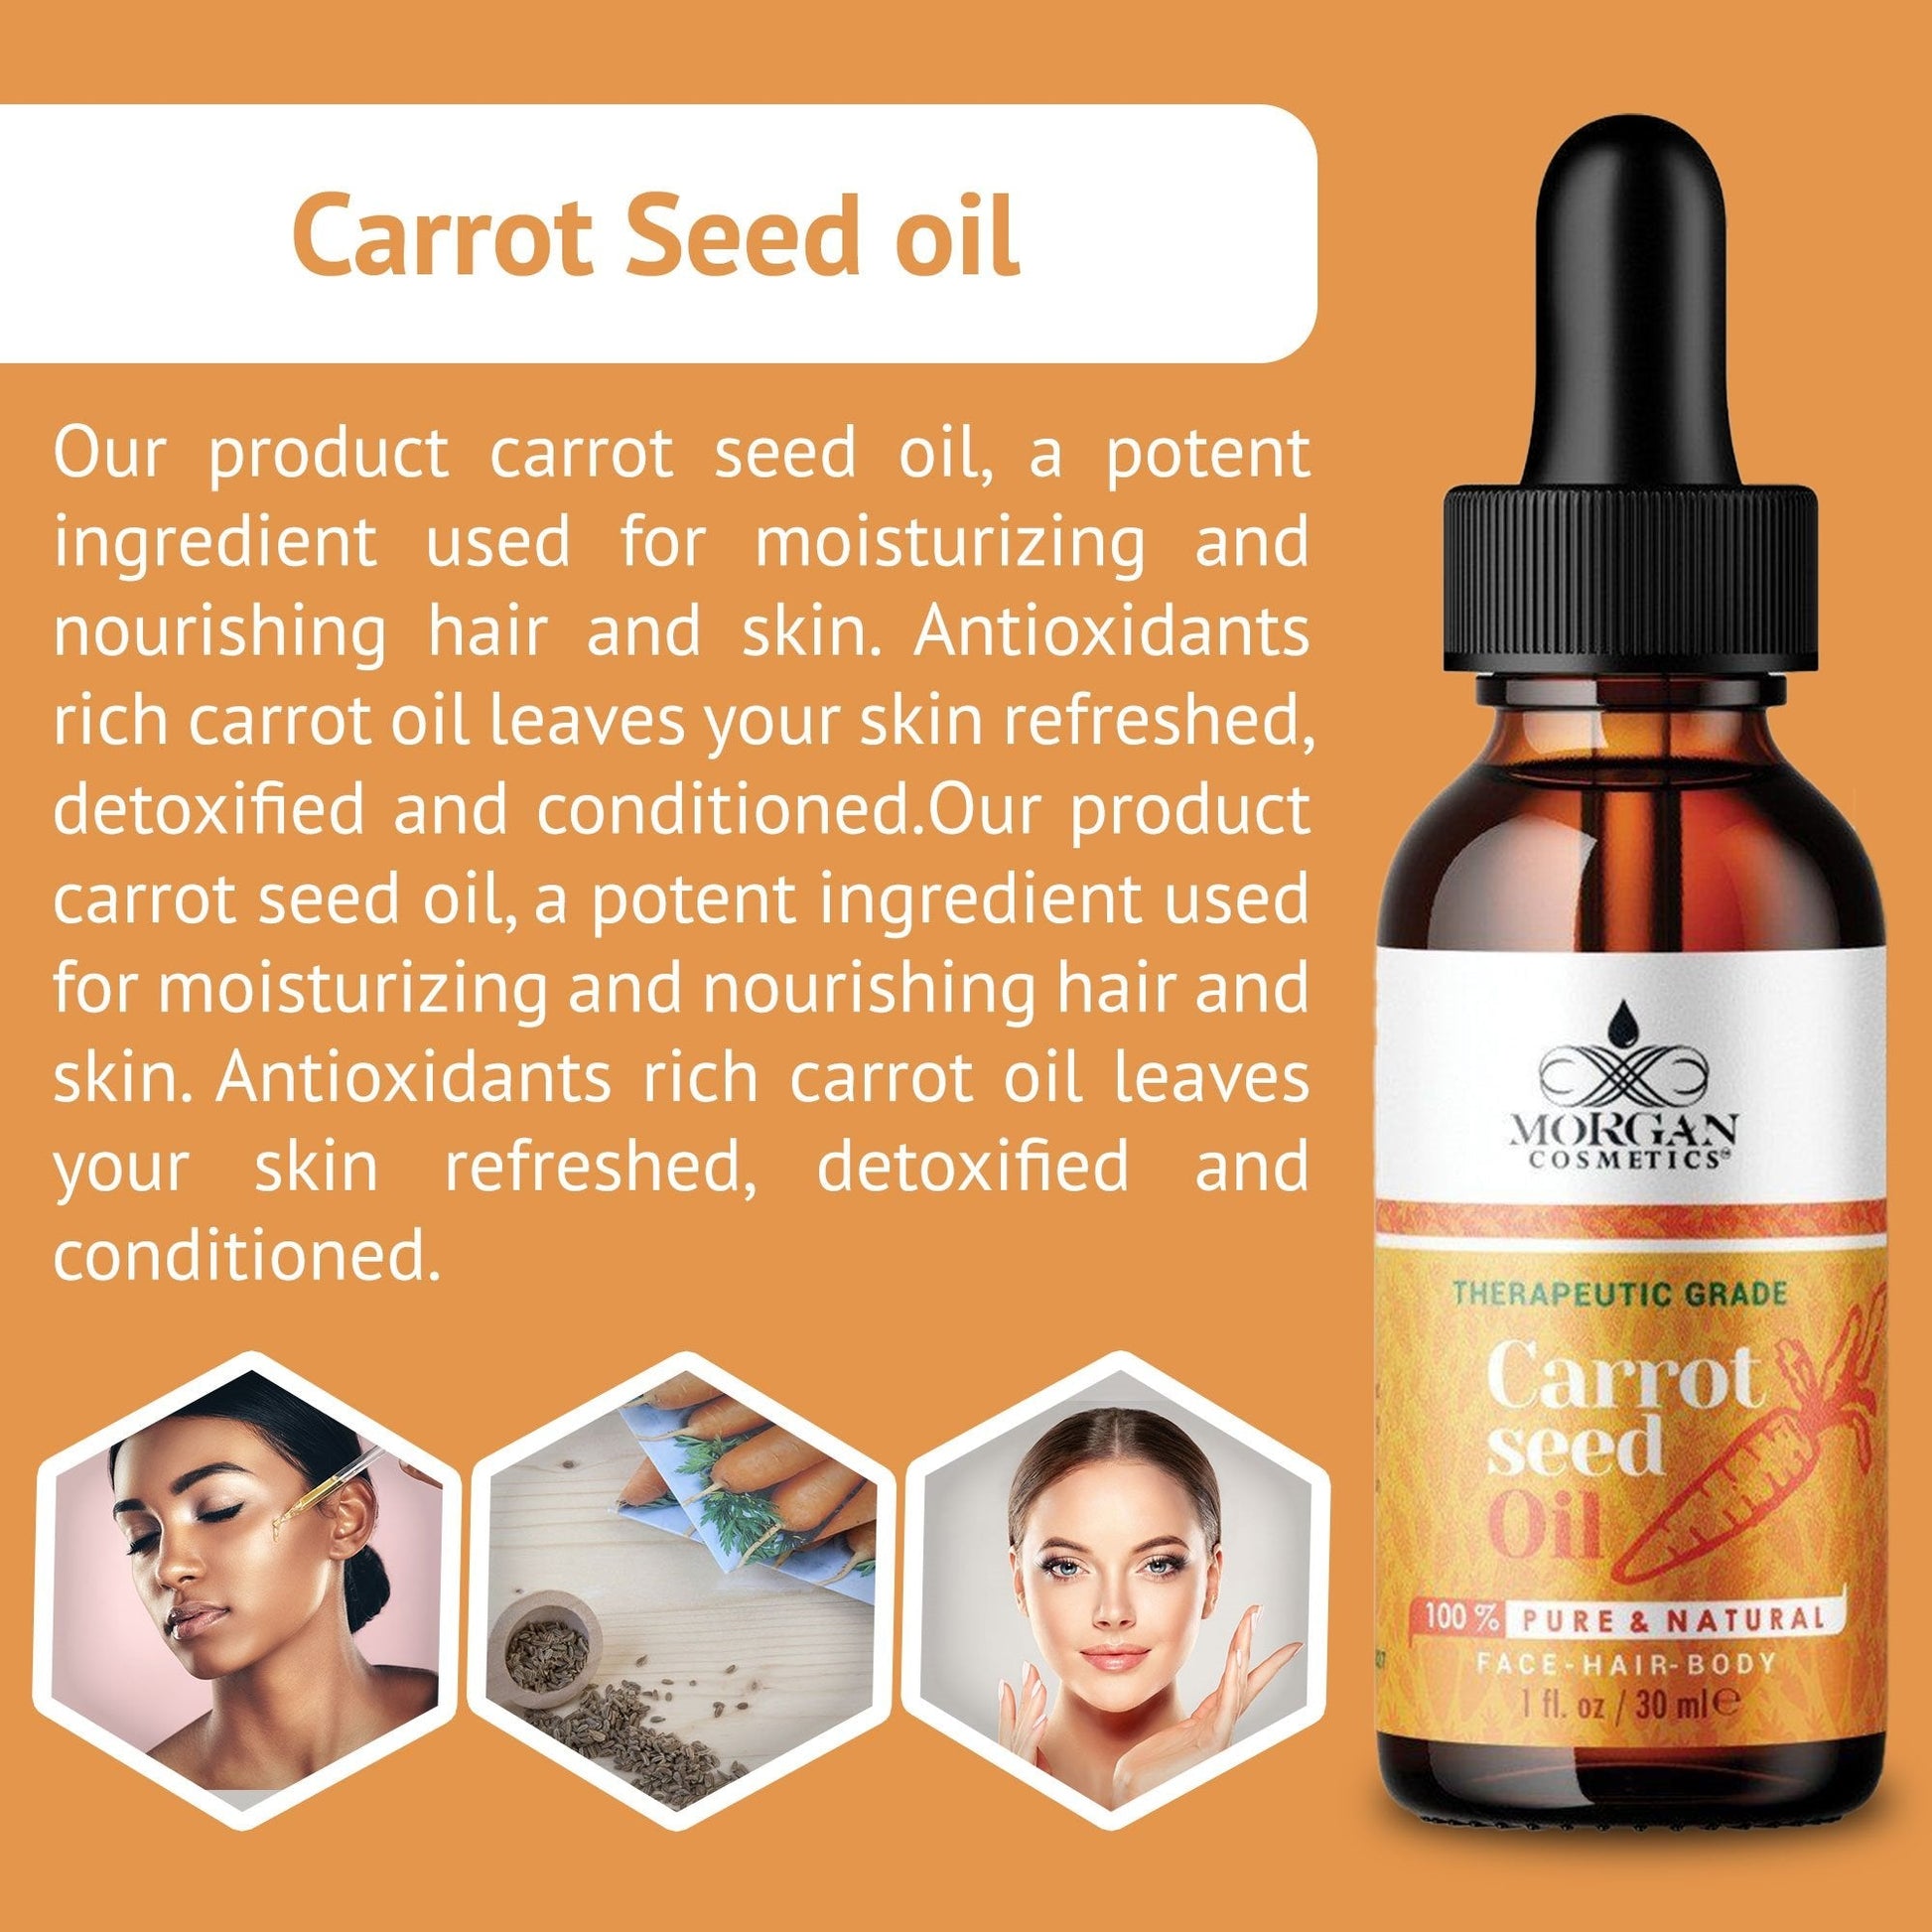 100% Pure CARROT SEED OIL Therapeutic Grade  Face-Hair-Body 1 oz/30 ml freeshipping - morgancosmeticsofficial